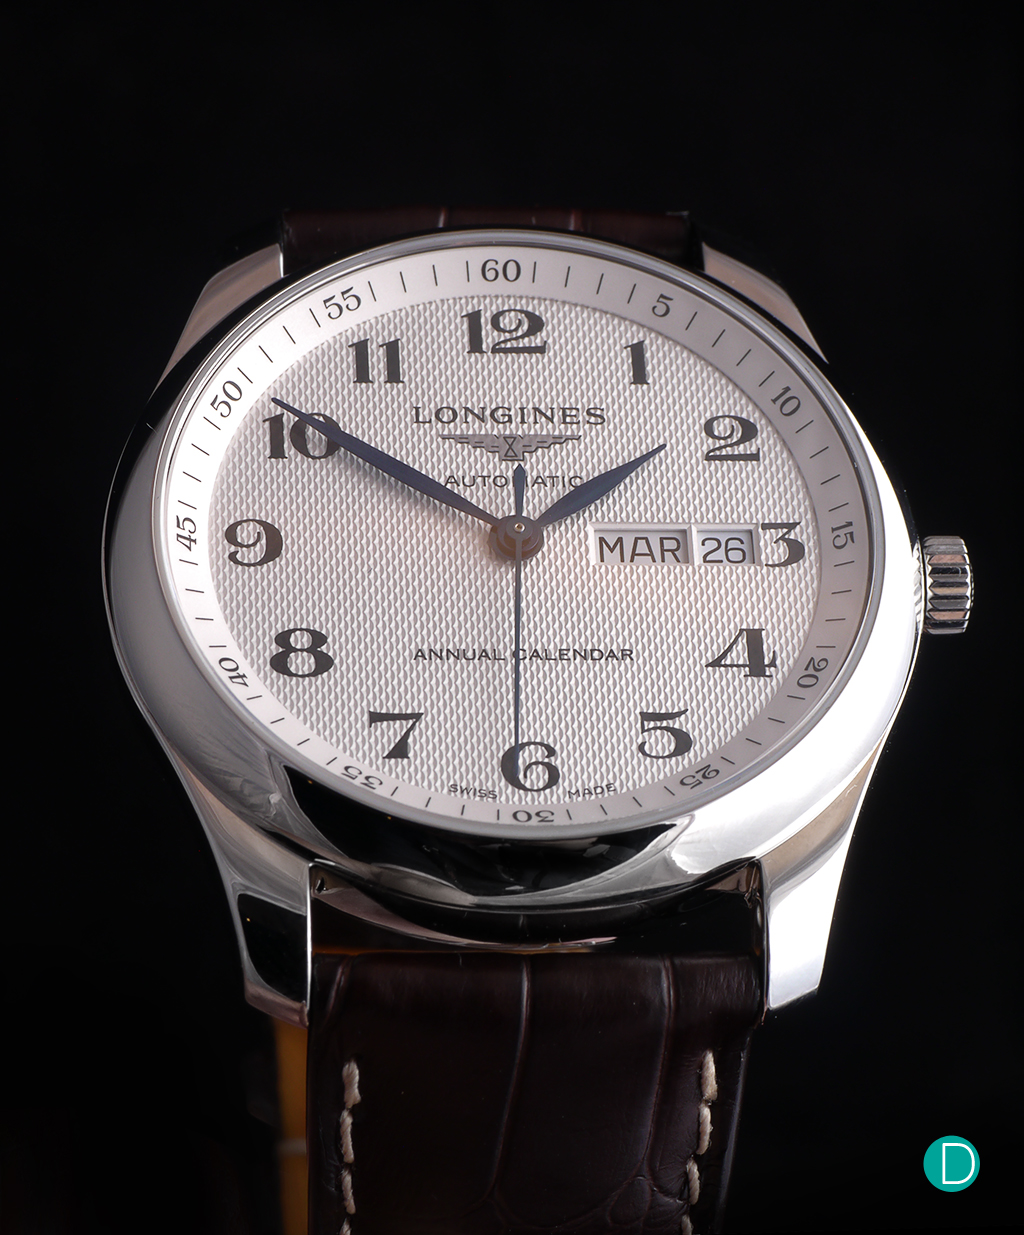 Handson review of the most affordable annual calendar The Longines